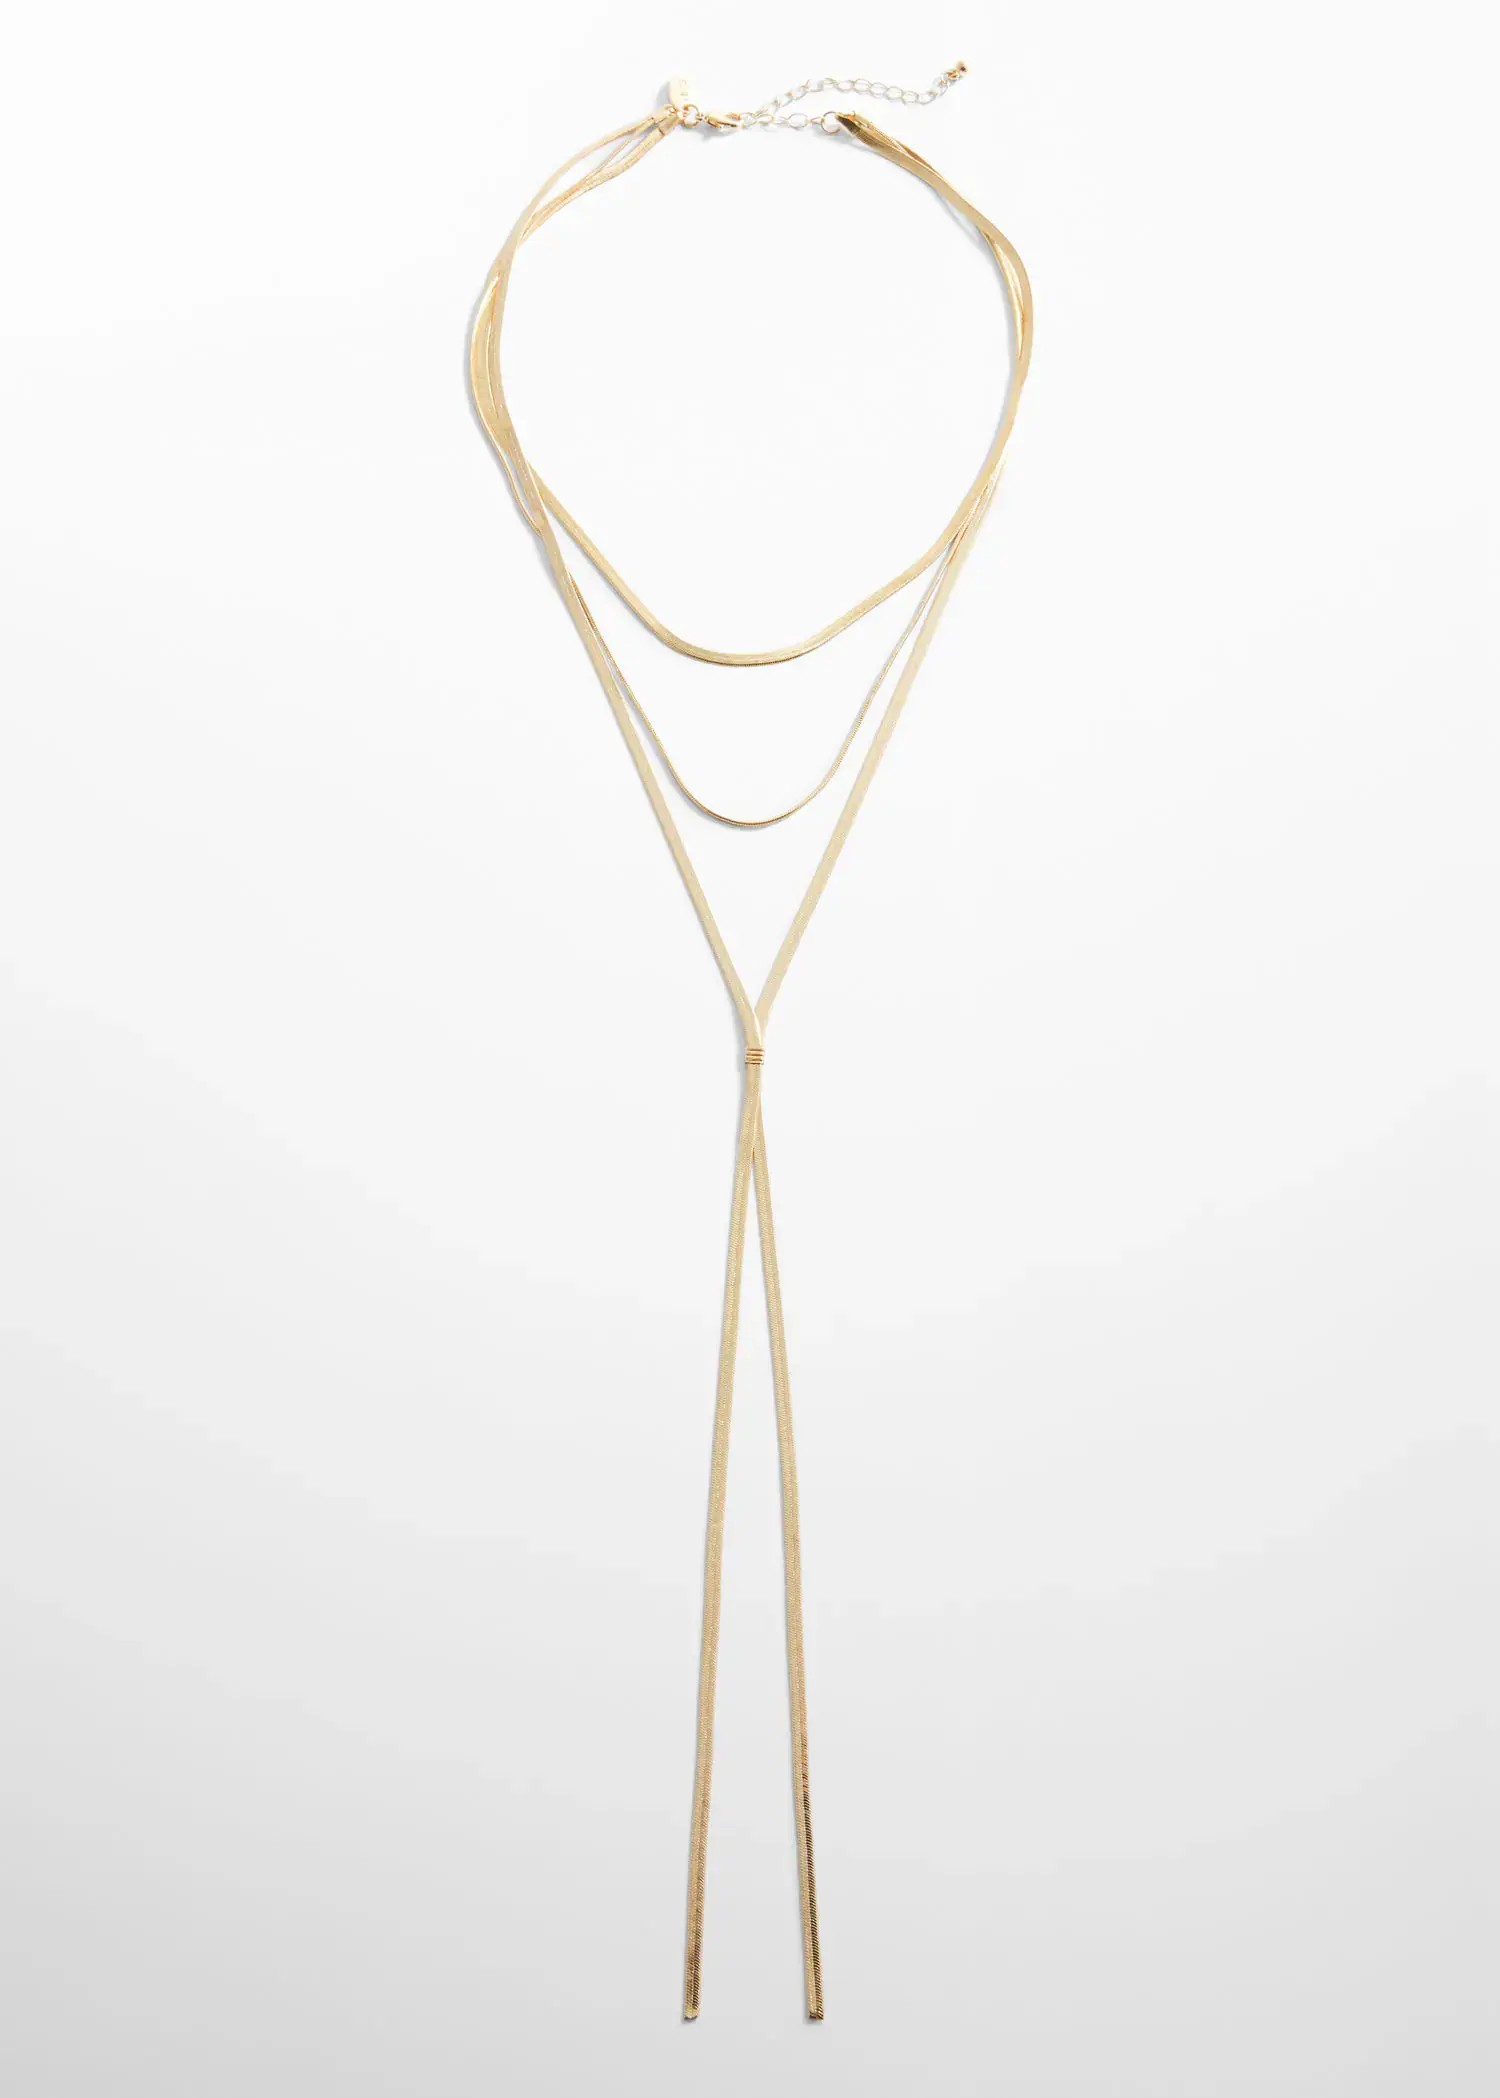 Mango Long triple necklace. a long gold necklace with a long chain. 